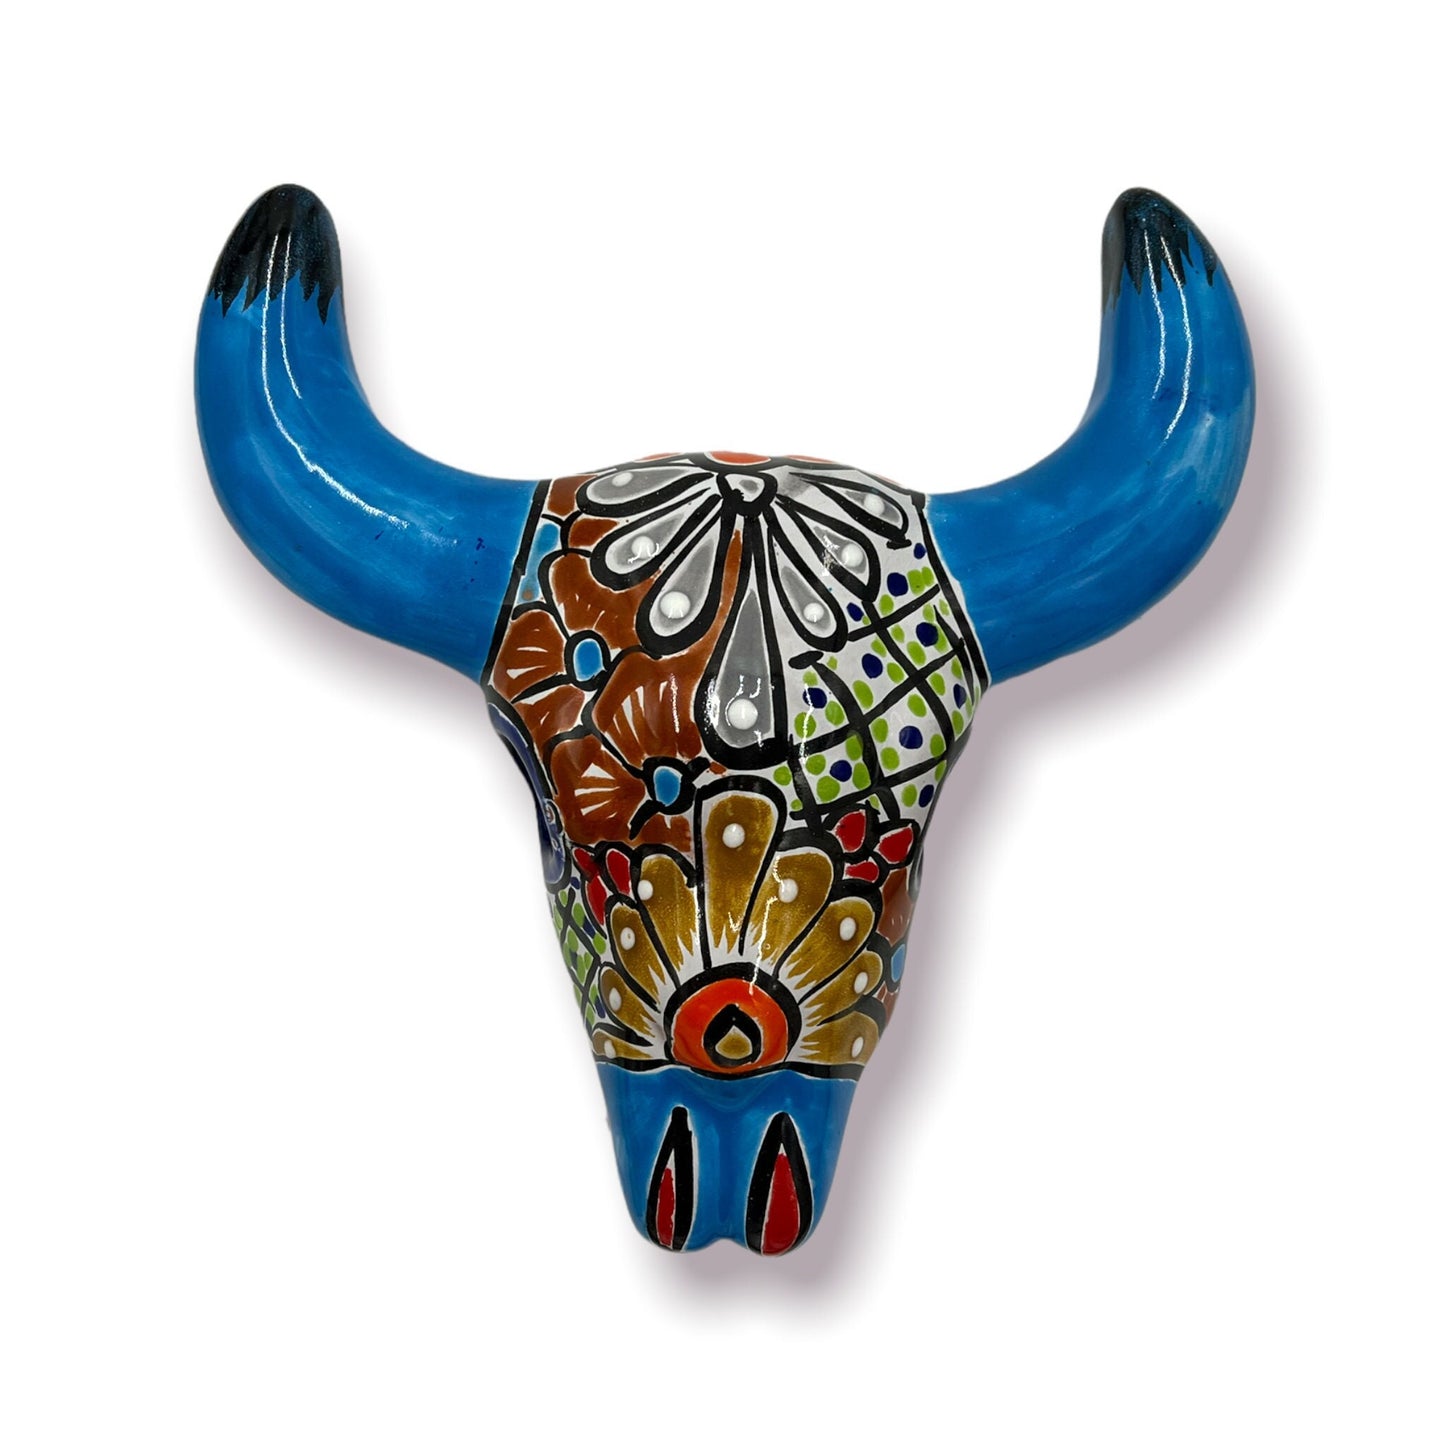 Colorful Talavera Bull Skull | Handcrafted Mexican Longhorn Wall Decor 10.5"x11"